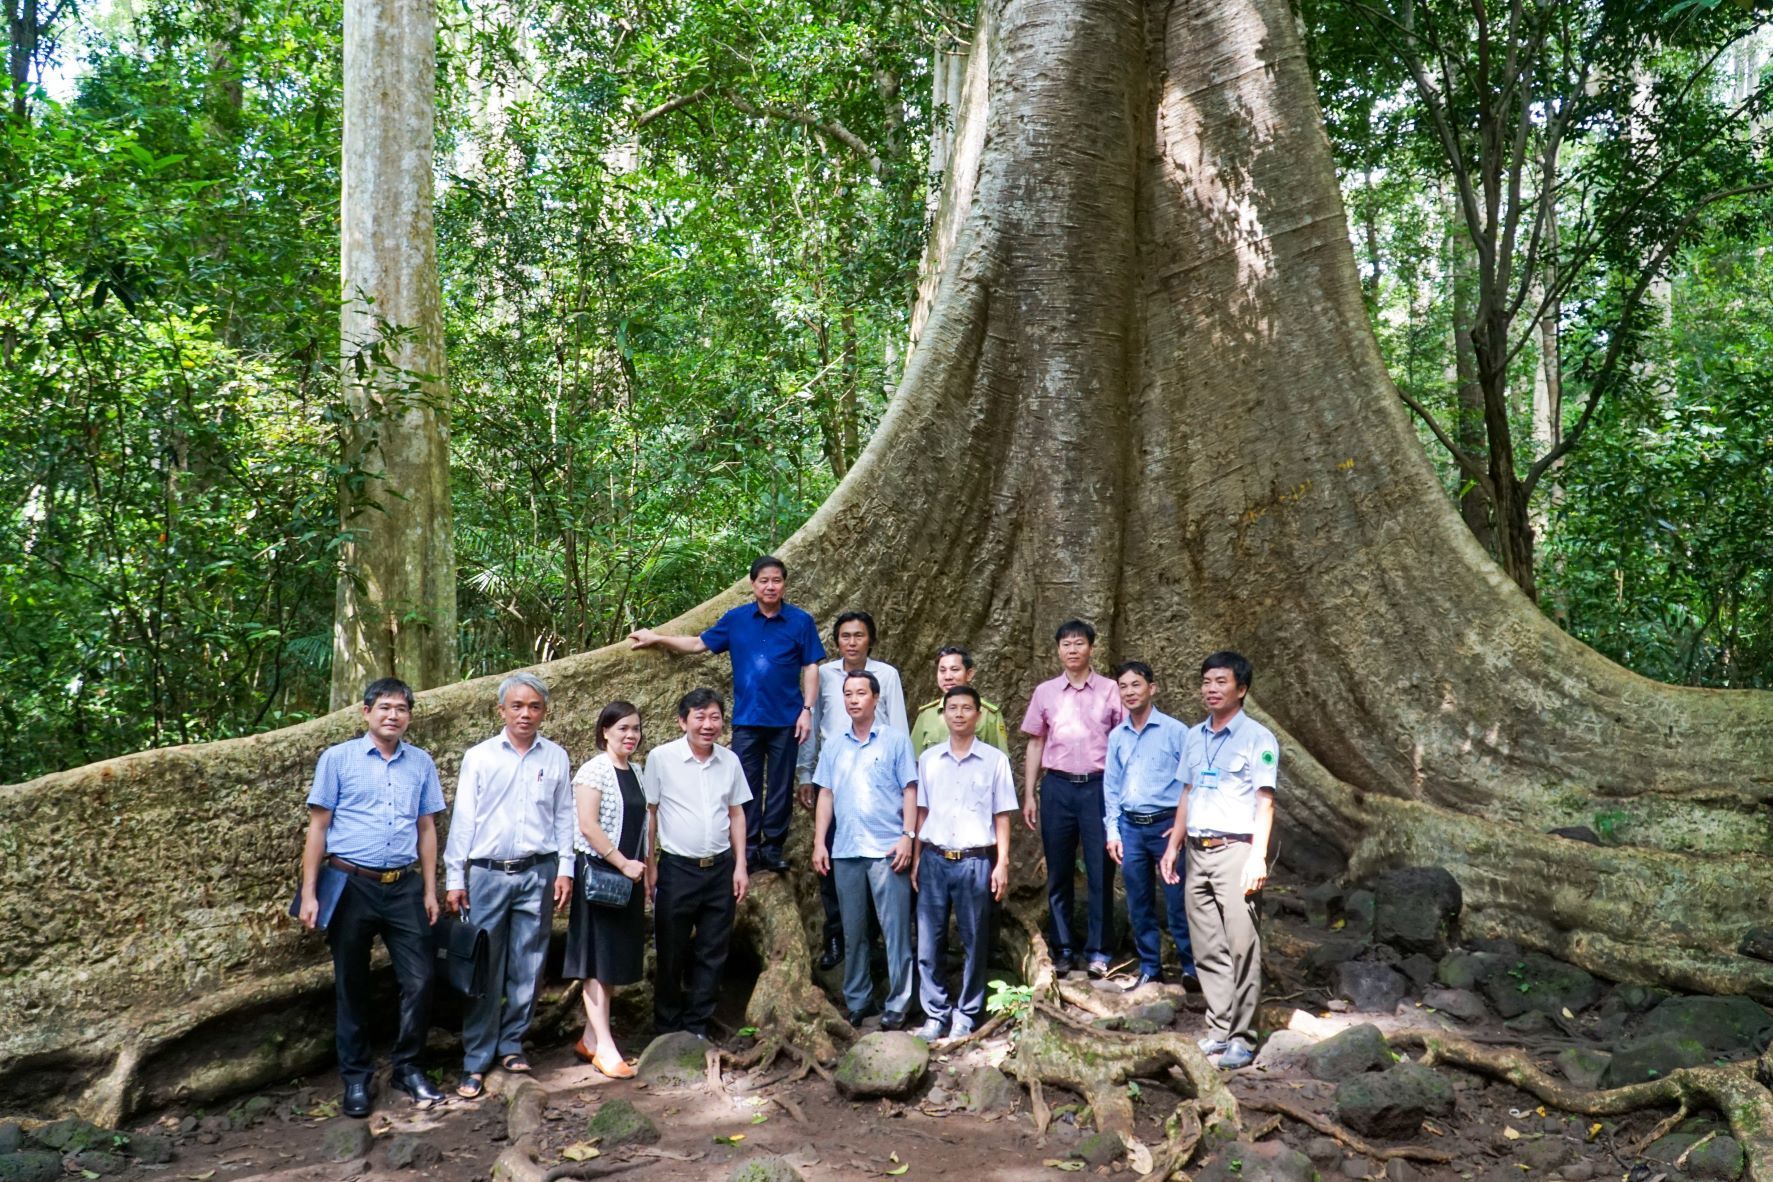 A group of people standing in front of a large tree

Description automatically generated with medium confidence